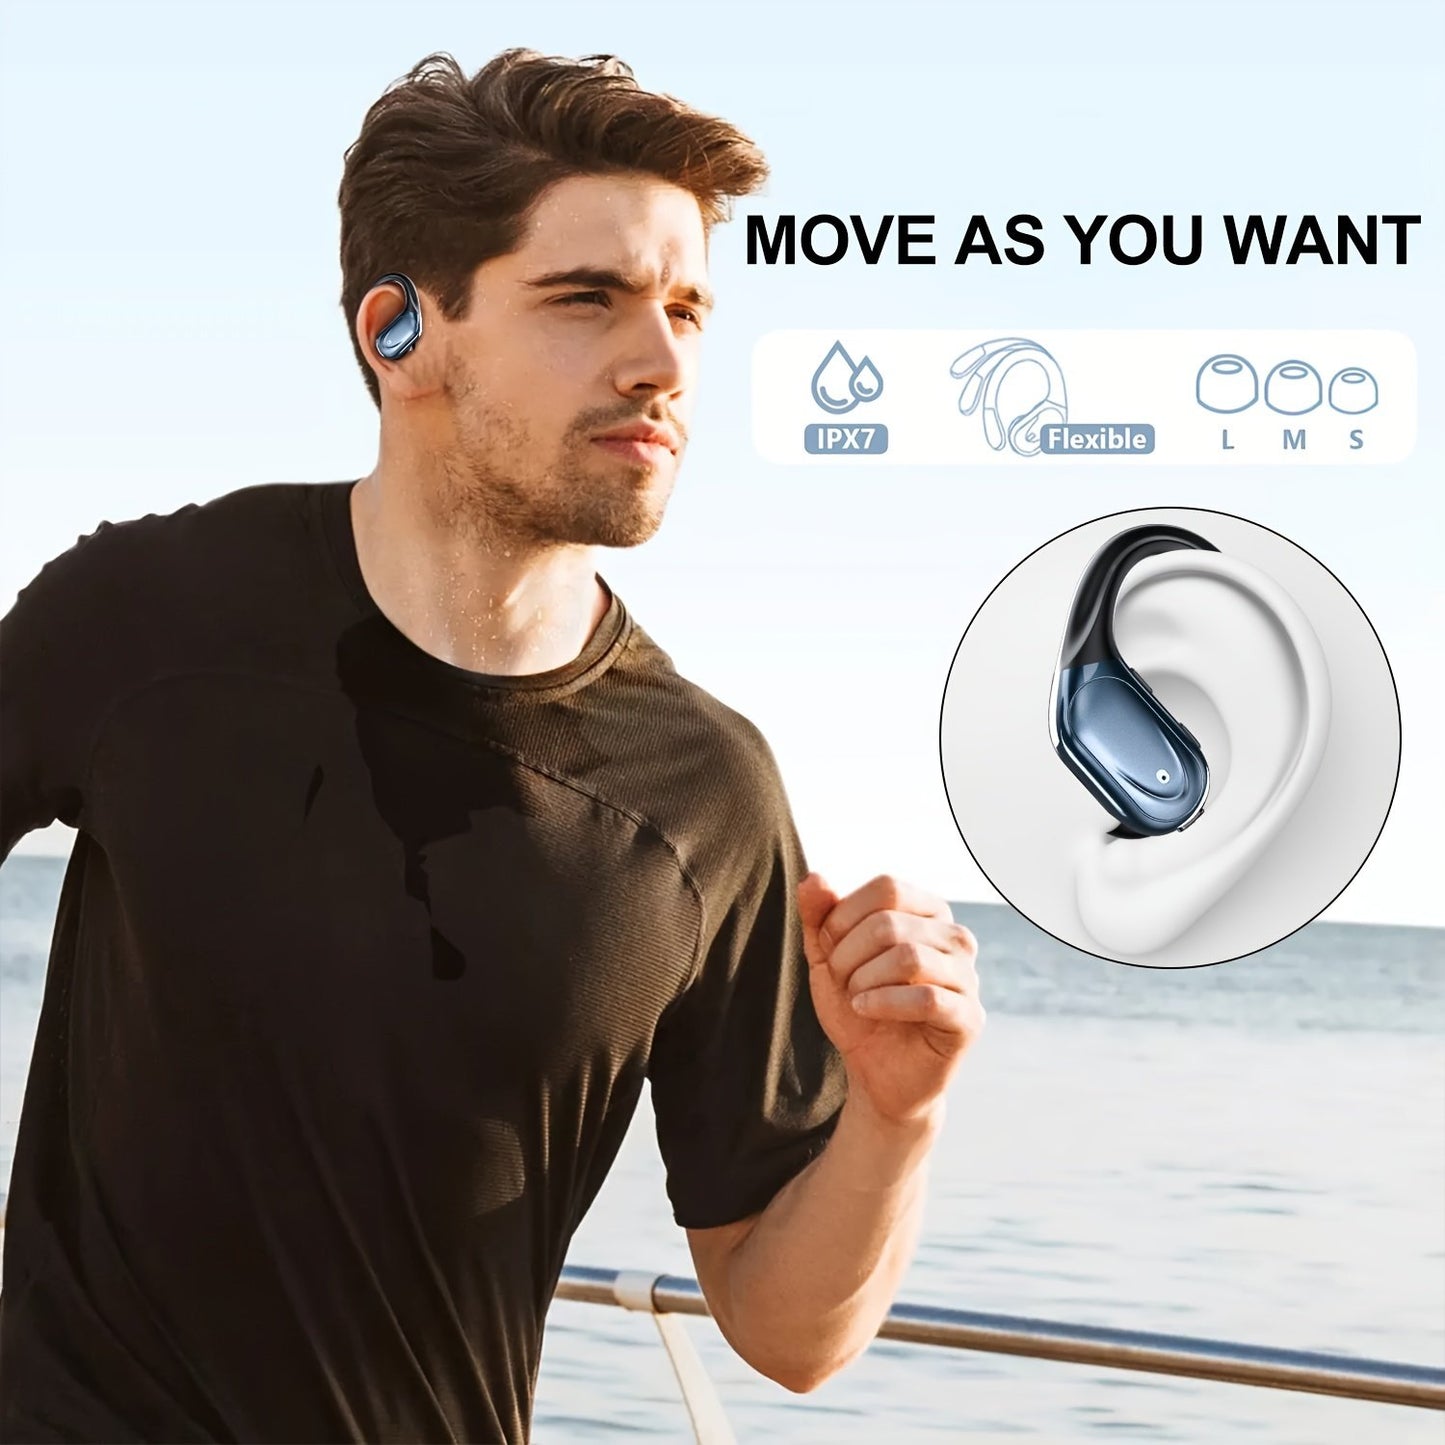 Noise Cancelling IPX7 Waterproof Wireless Earphones With Charging Case Charging Display For Android/IOS Smartphones